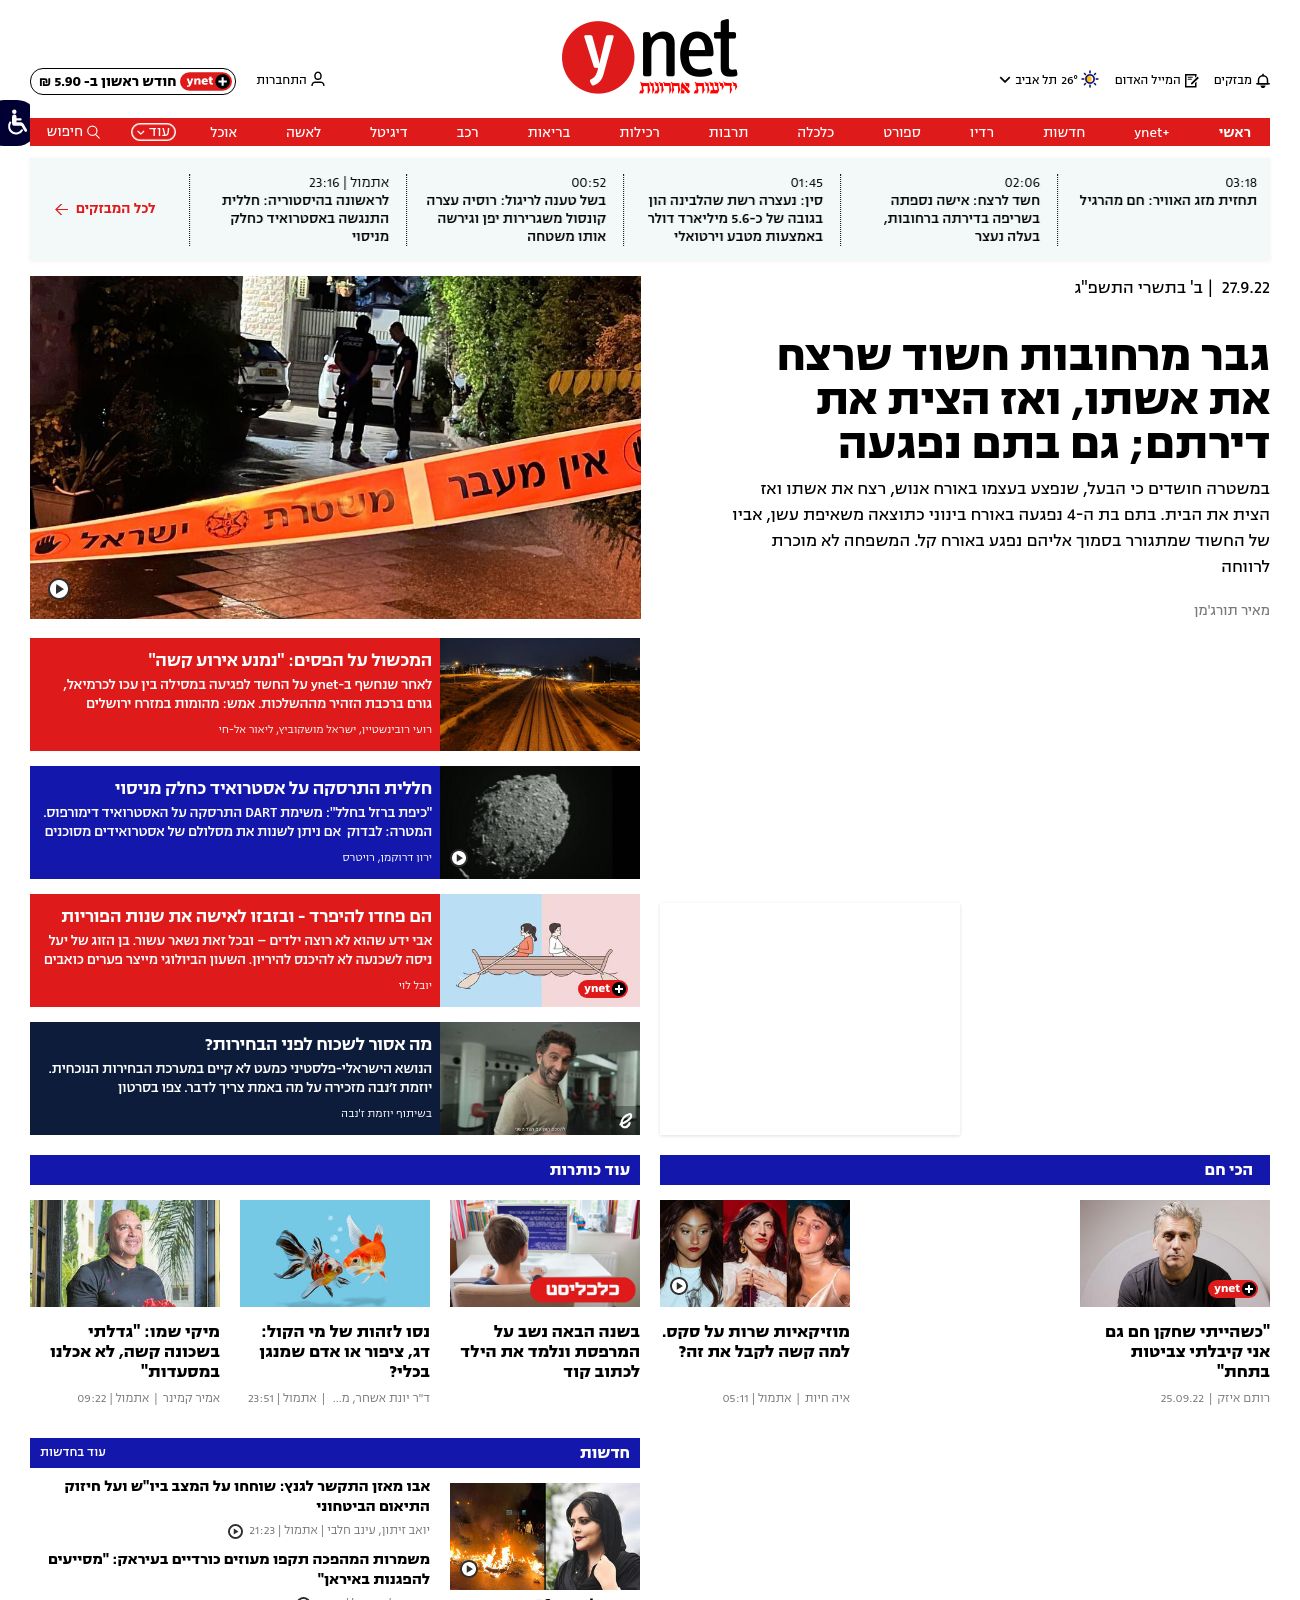 Ynet at 2022-09-27 10:06:22+03:00 local time